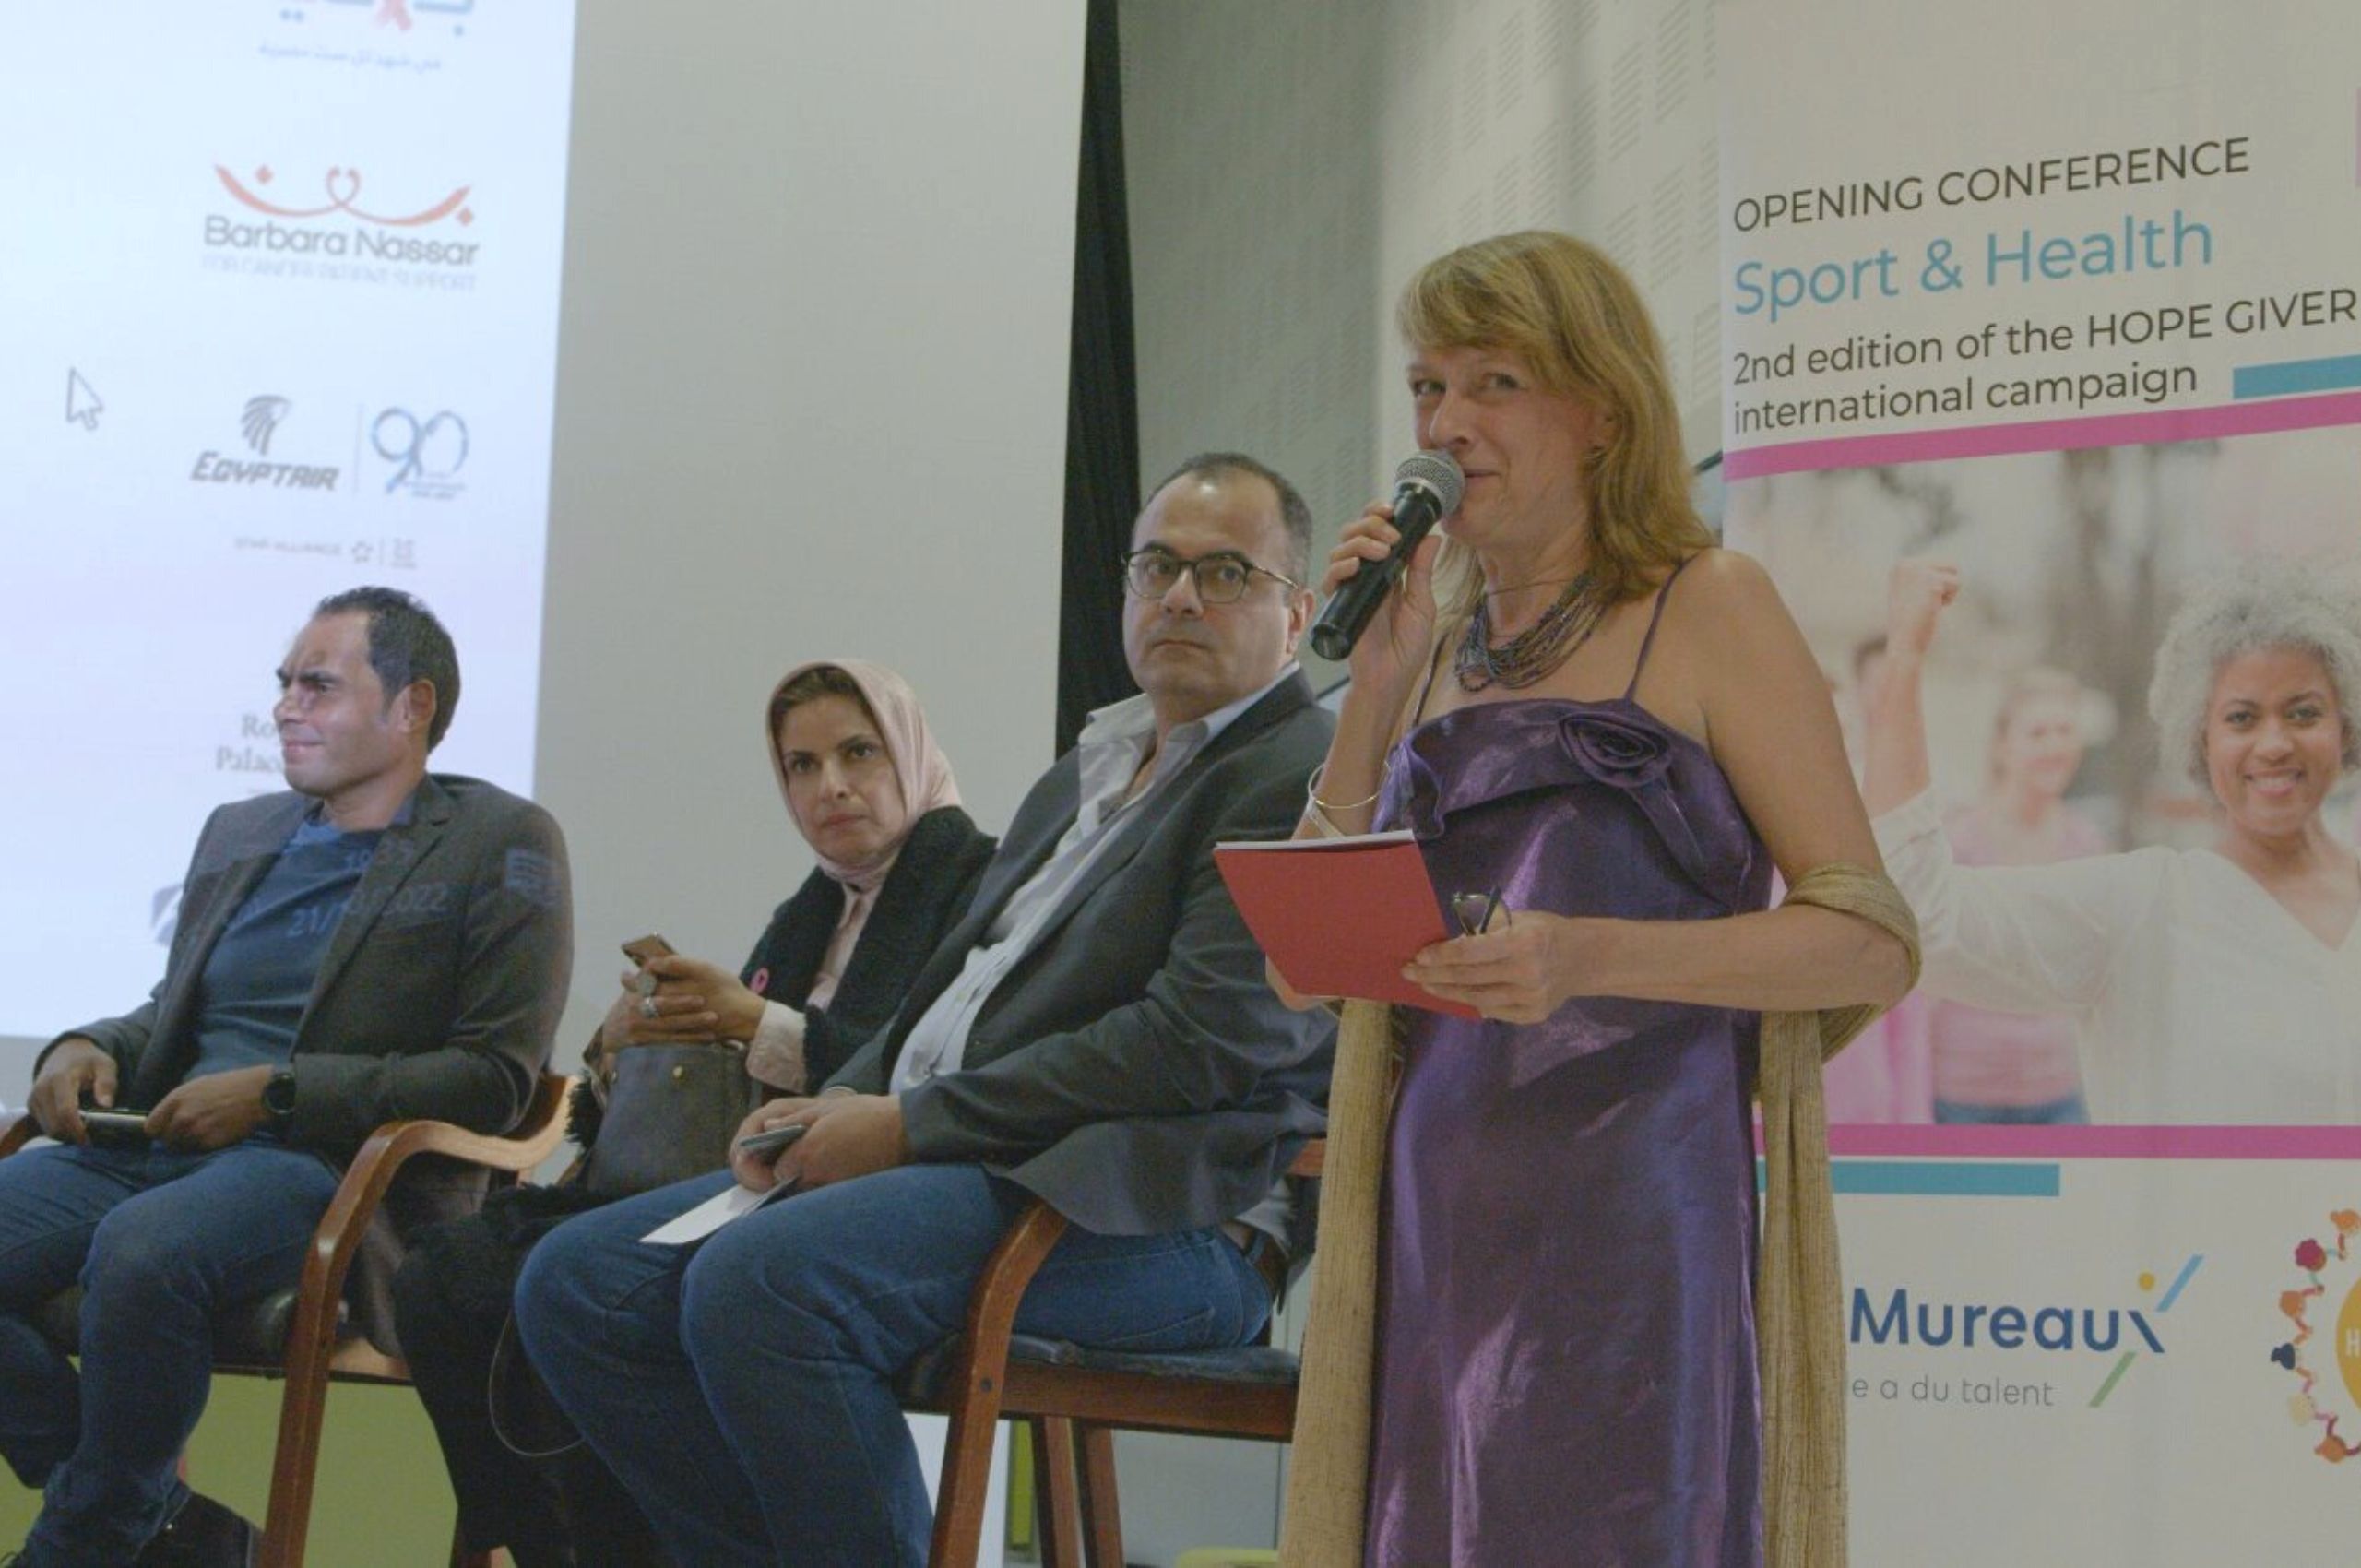 2nd edition of the International "Sport & Health" Conference in the city of Les Mureaux, france